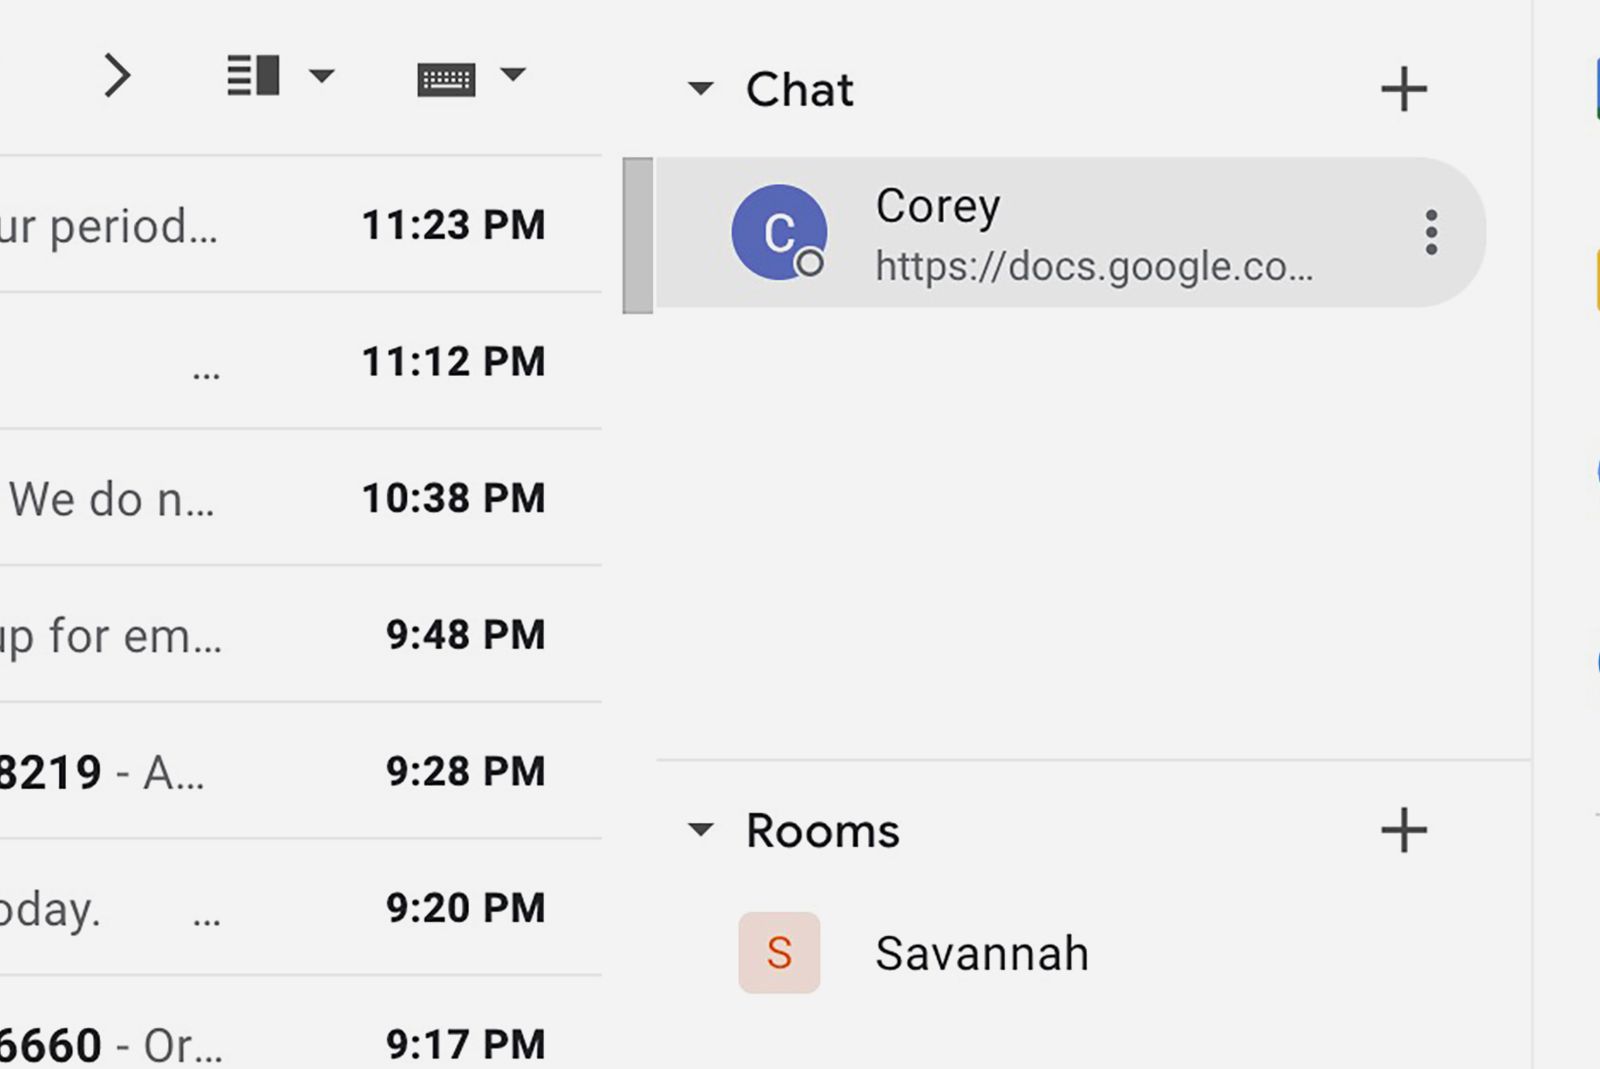 Google Chat finally rolls out to Gmail users: How to get early access photo 3